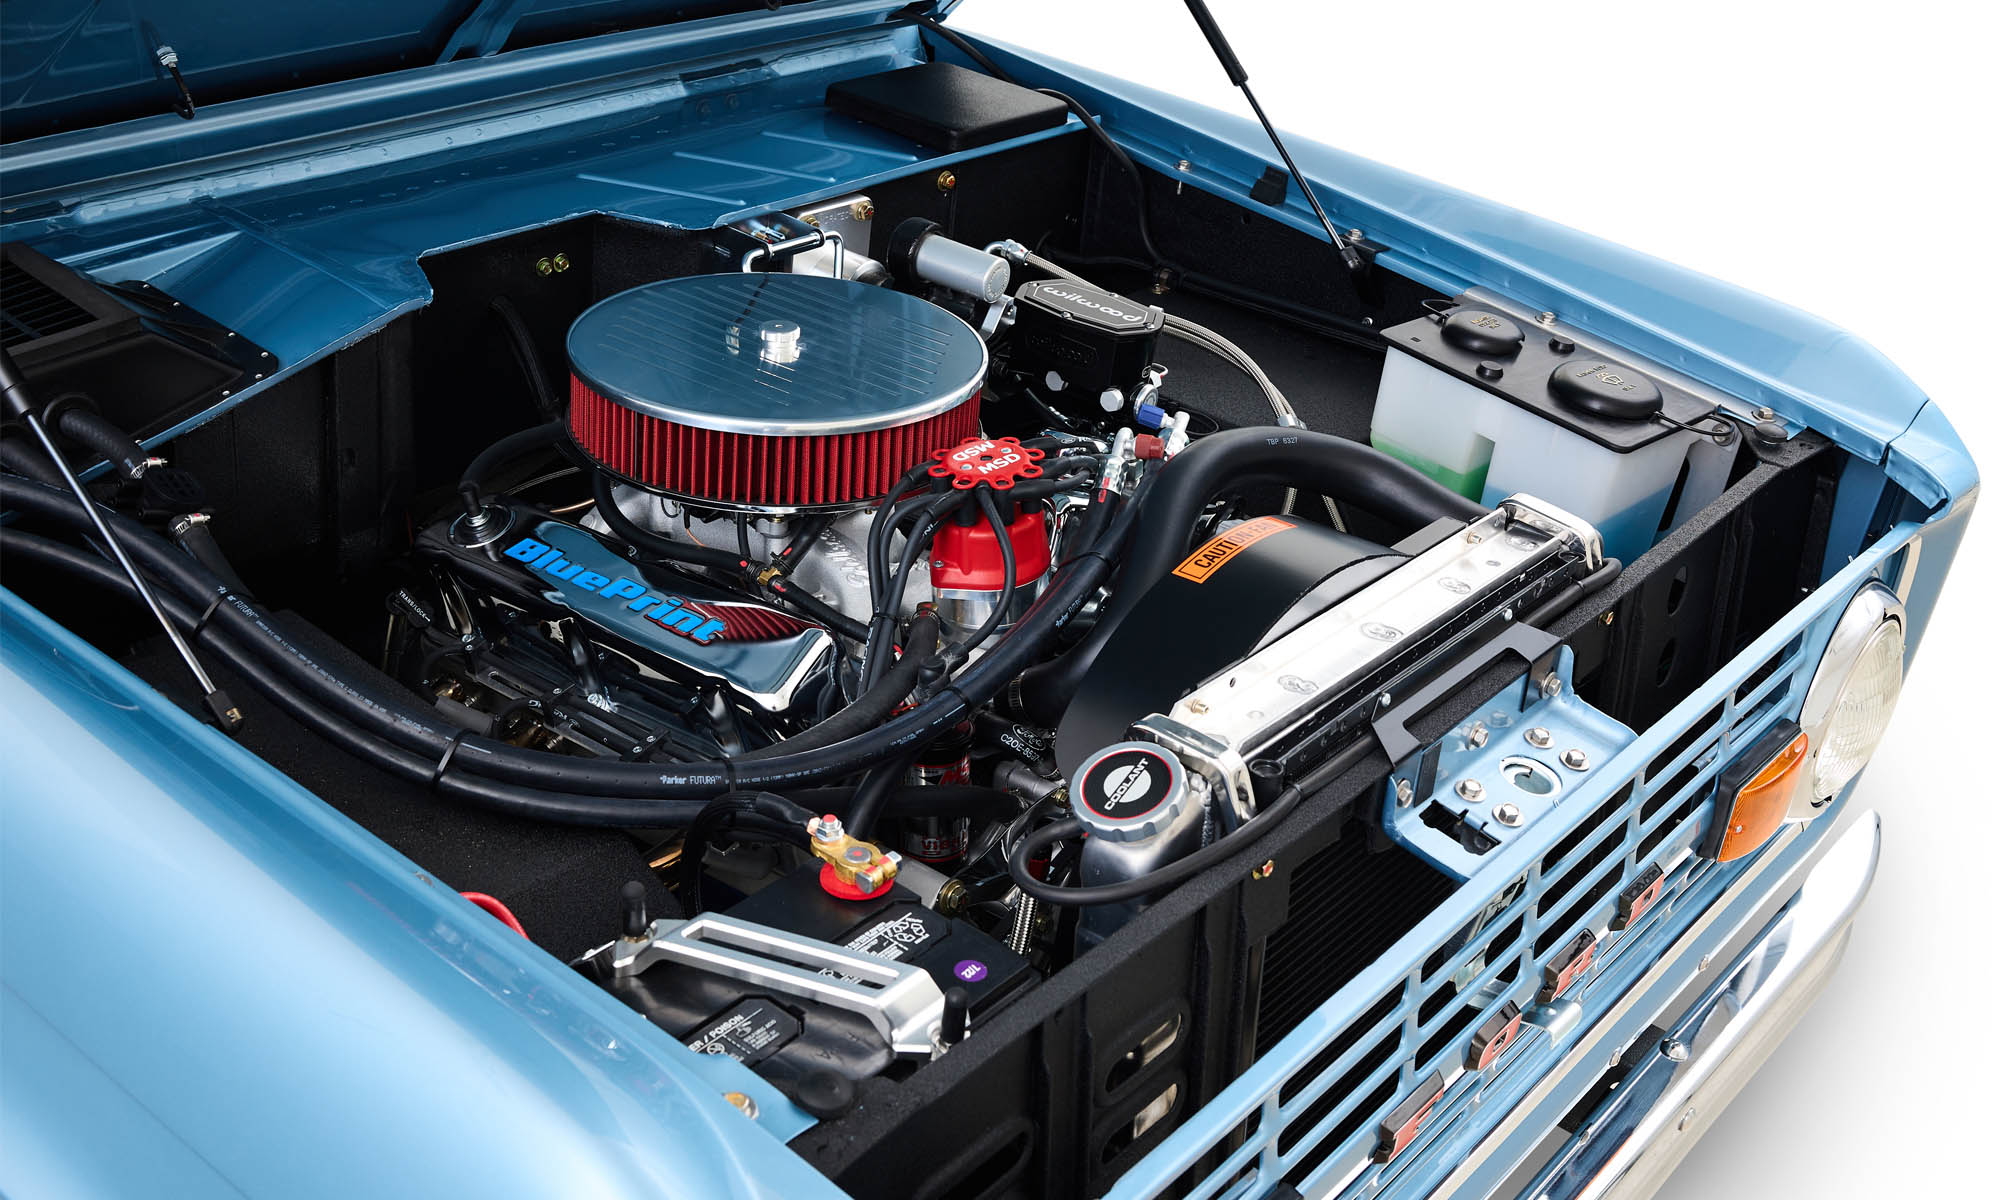 302 crate engine in a Classic Ford Broncos restored Brittany Blue Bronco